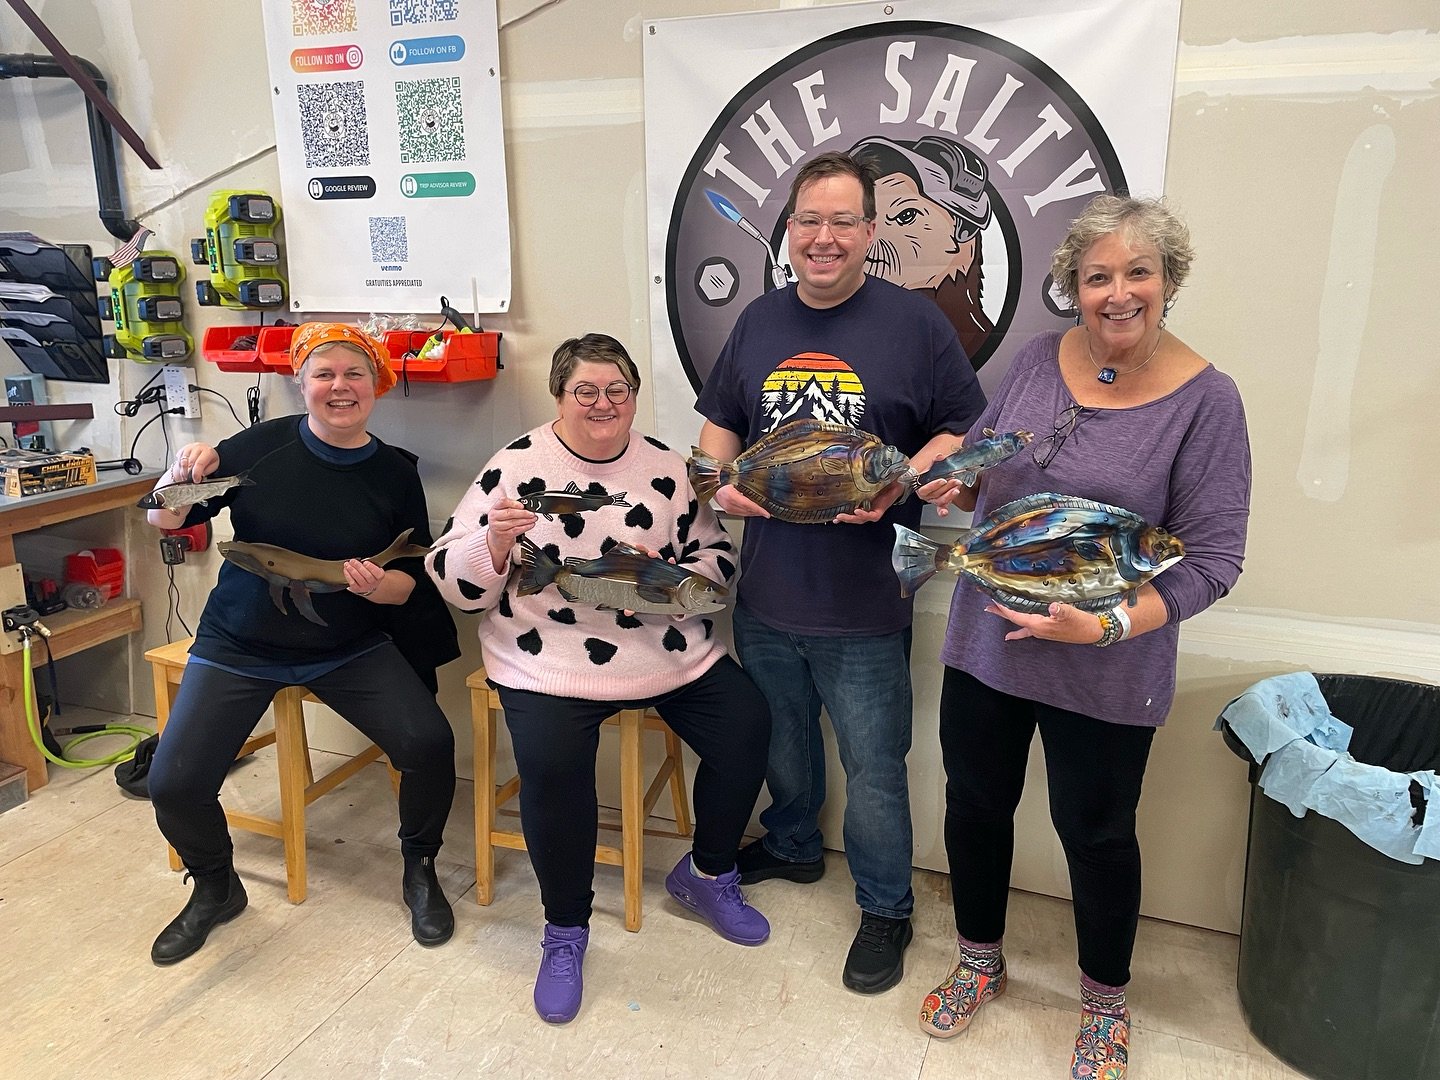 The Salty&rsquo;s first guests from the Westerdam in class today! Some great looking fish! #visitsitka #sitkaalaska #visitalaska #alaskashoretours #ventureashore #alaskacruise #alaskacruises #metalart #thingstodoinsitka #westerdam #westerdamcruise #h